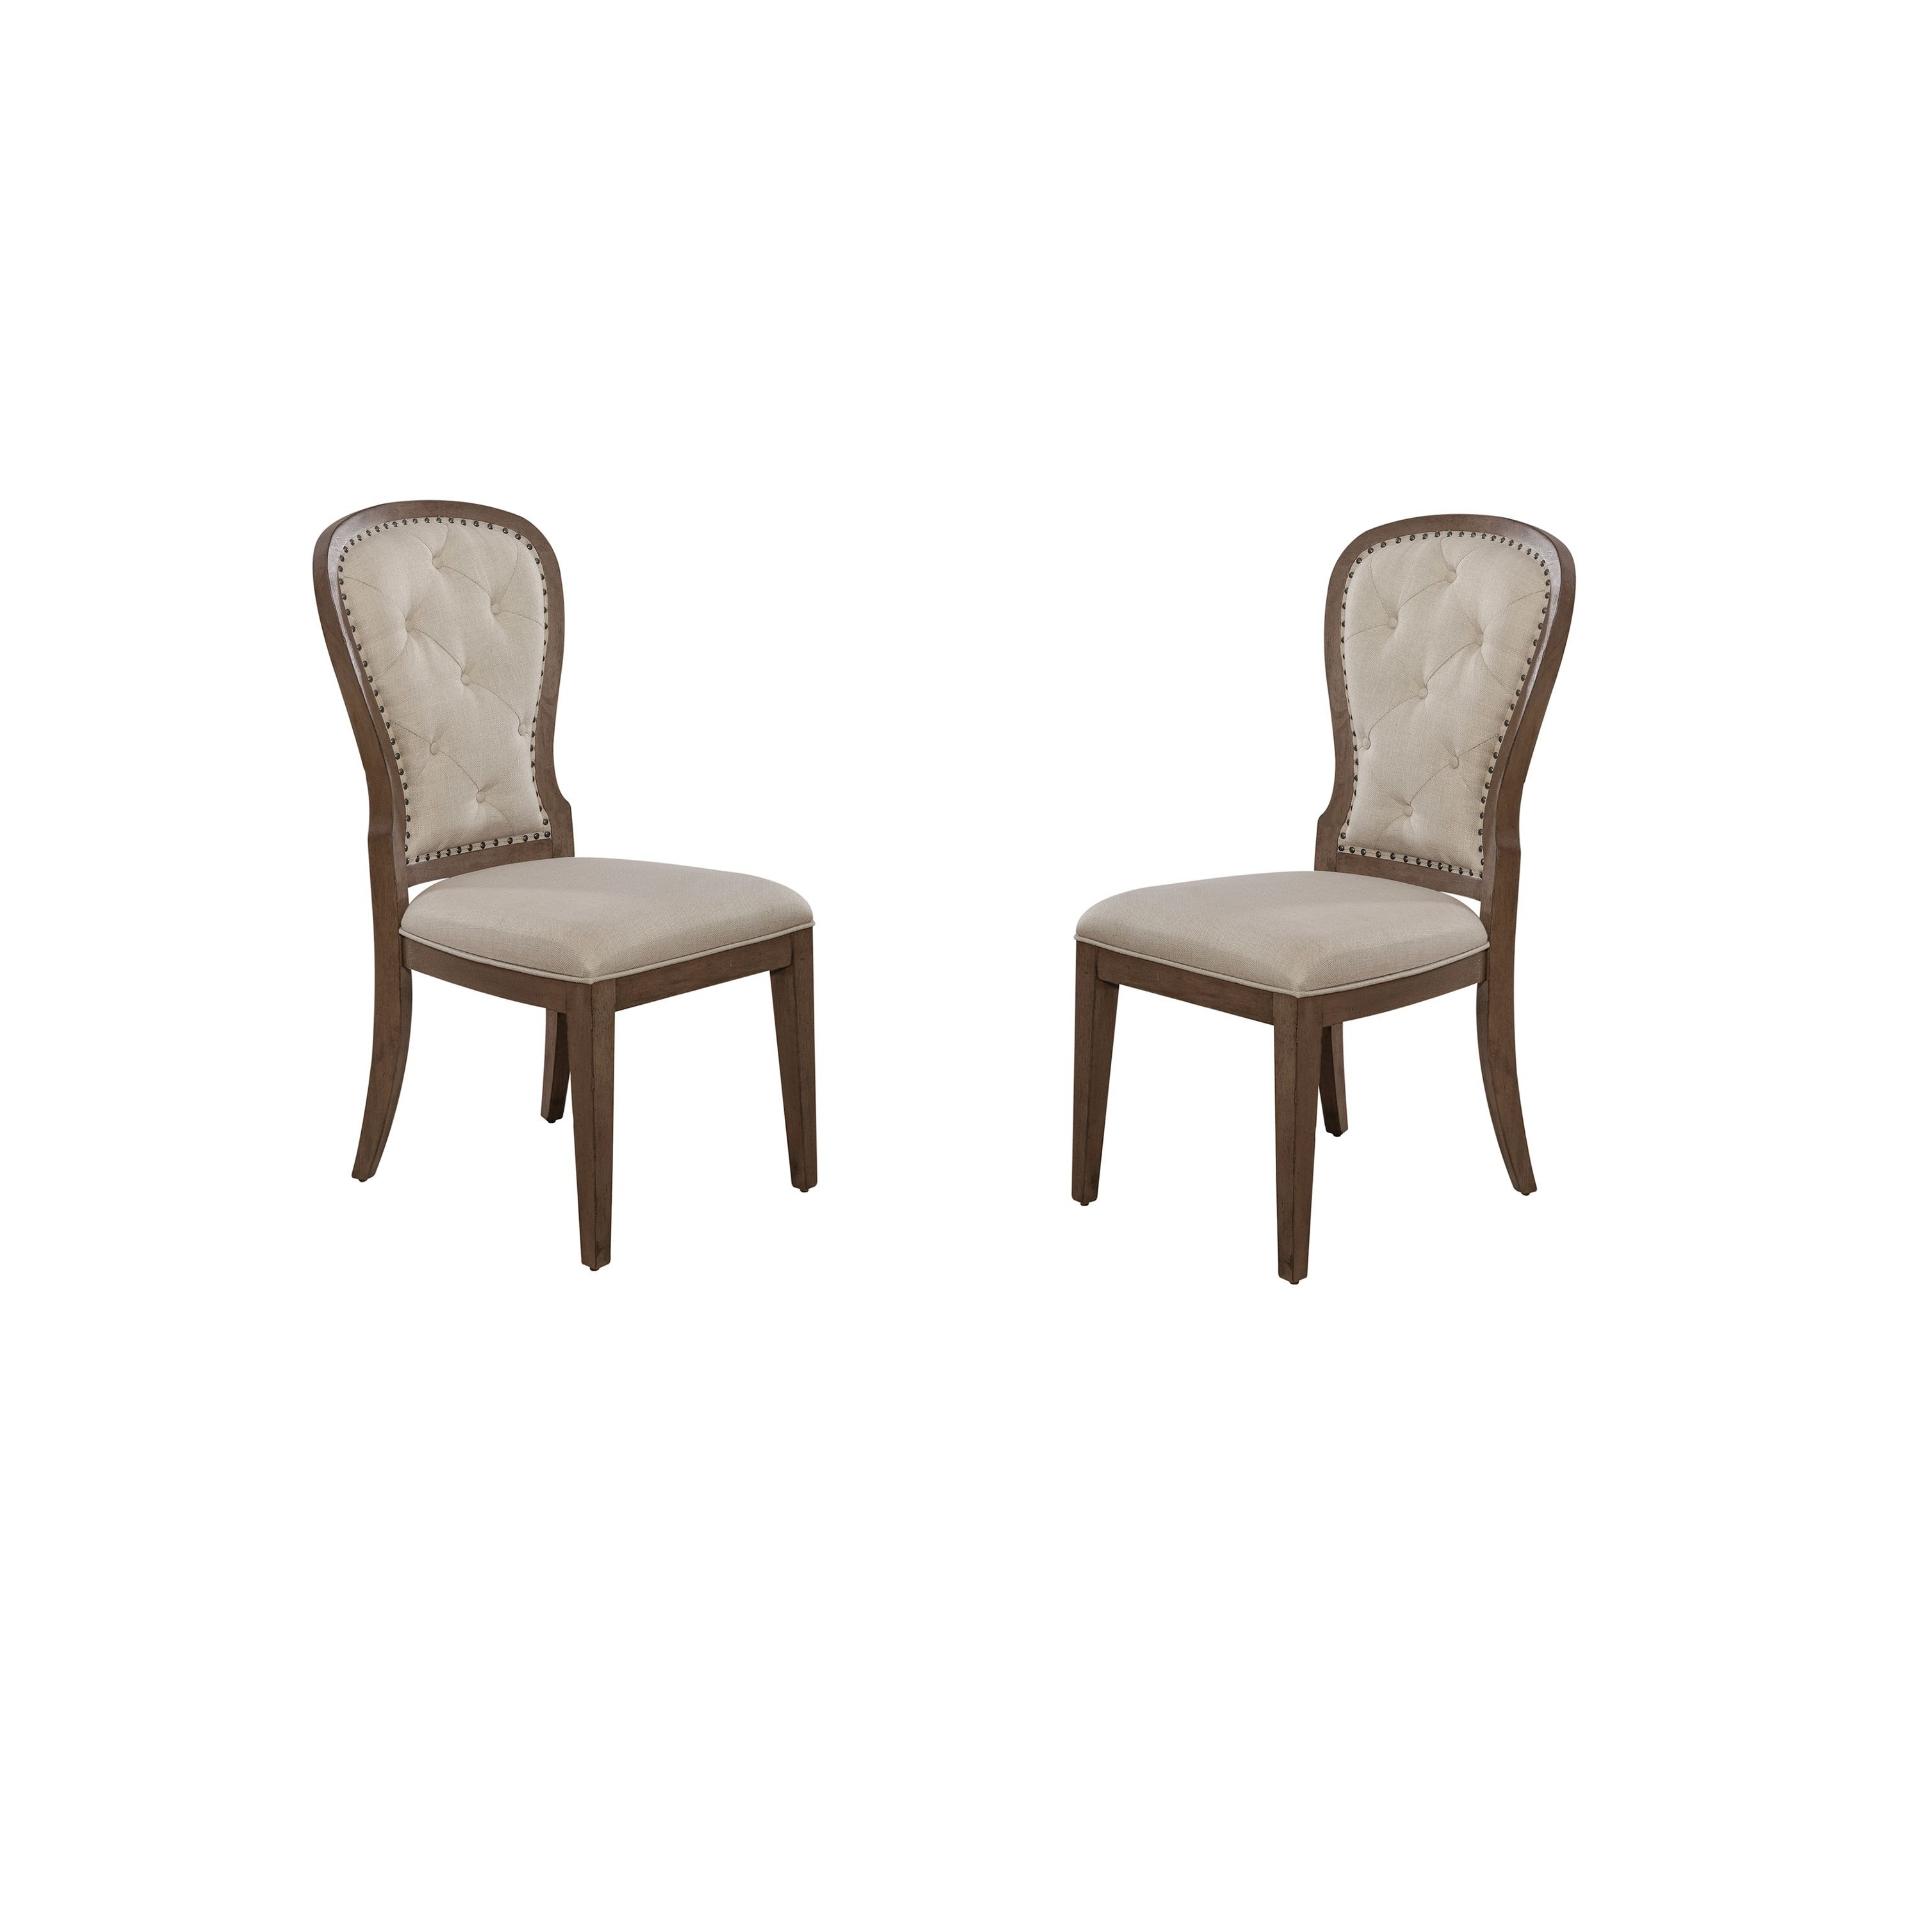 Transitional Dining Chair Set Americana Farmhouse (615-DR) 615-C0501S-Set-2 in Taupe, Black Linen